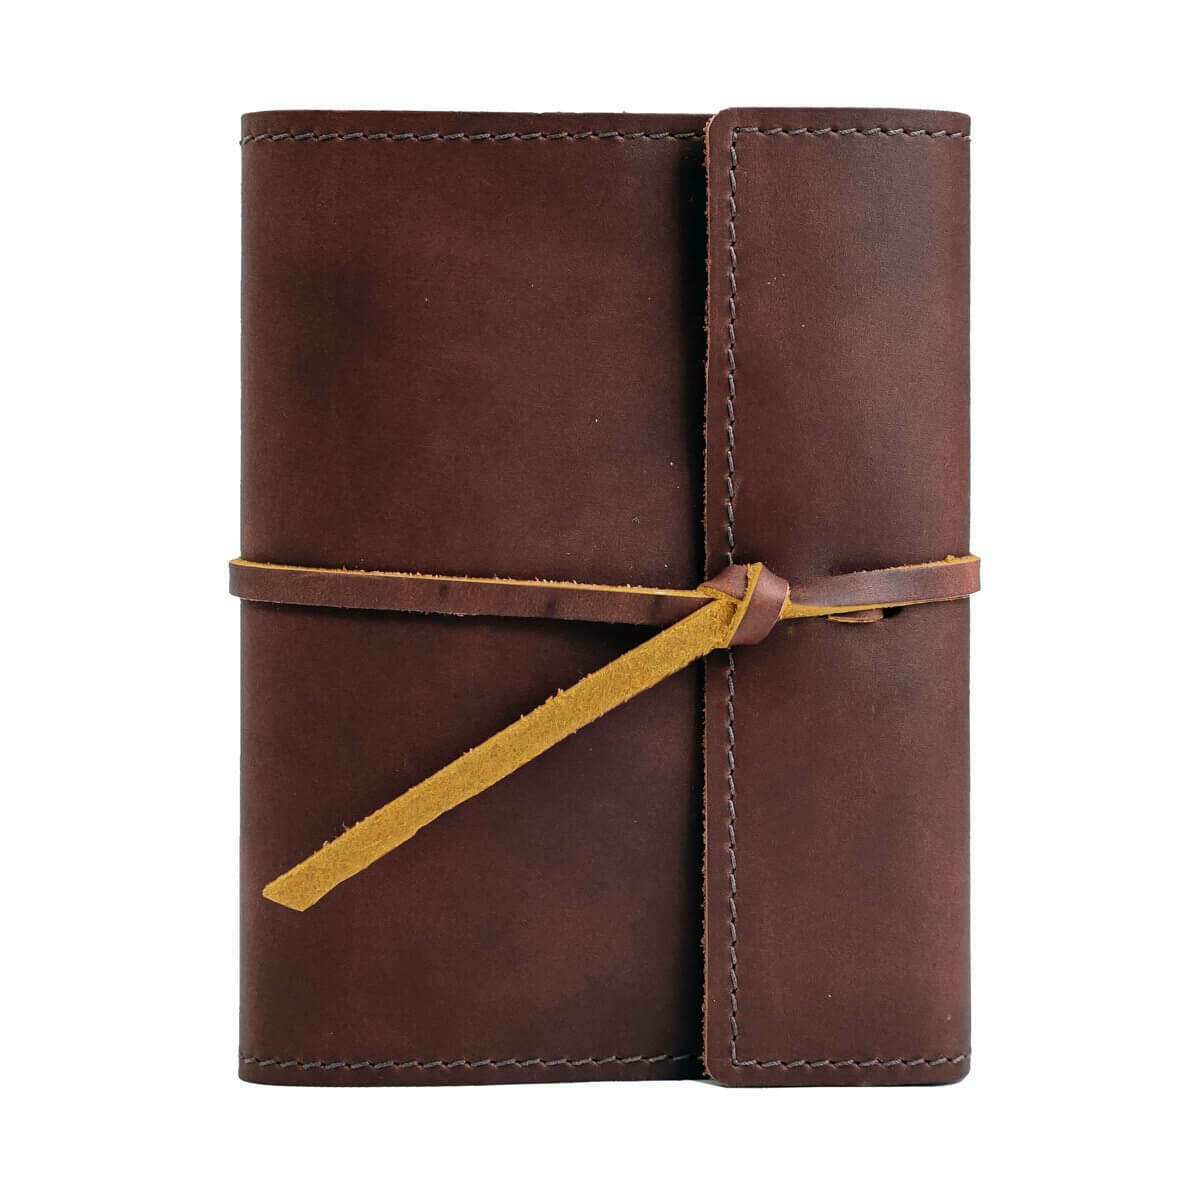 Writer's Log Leather Notebook